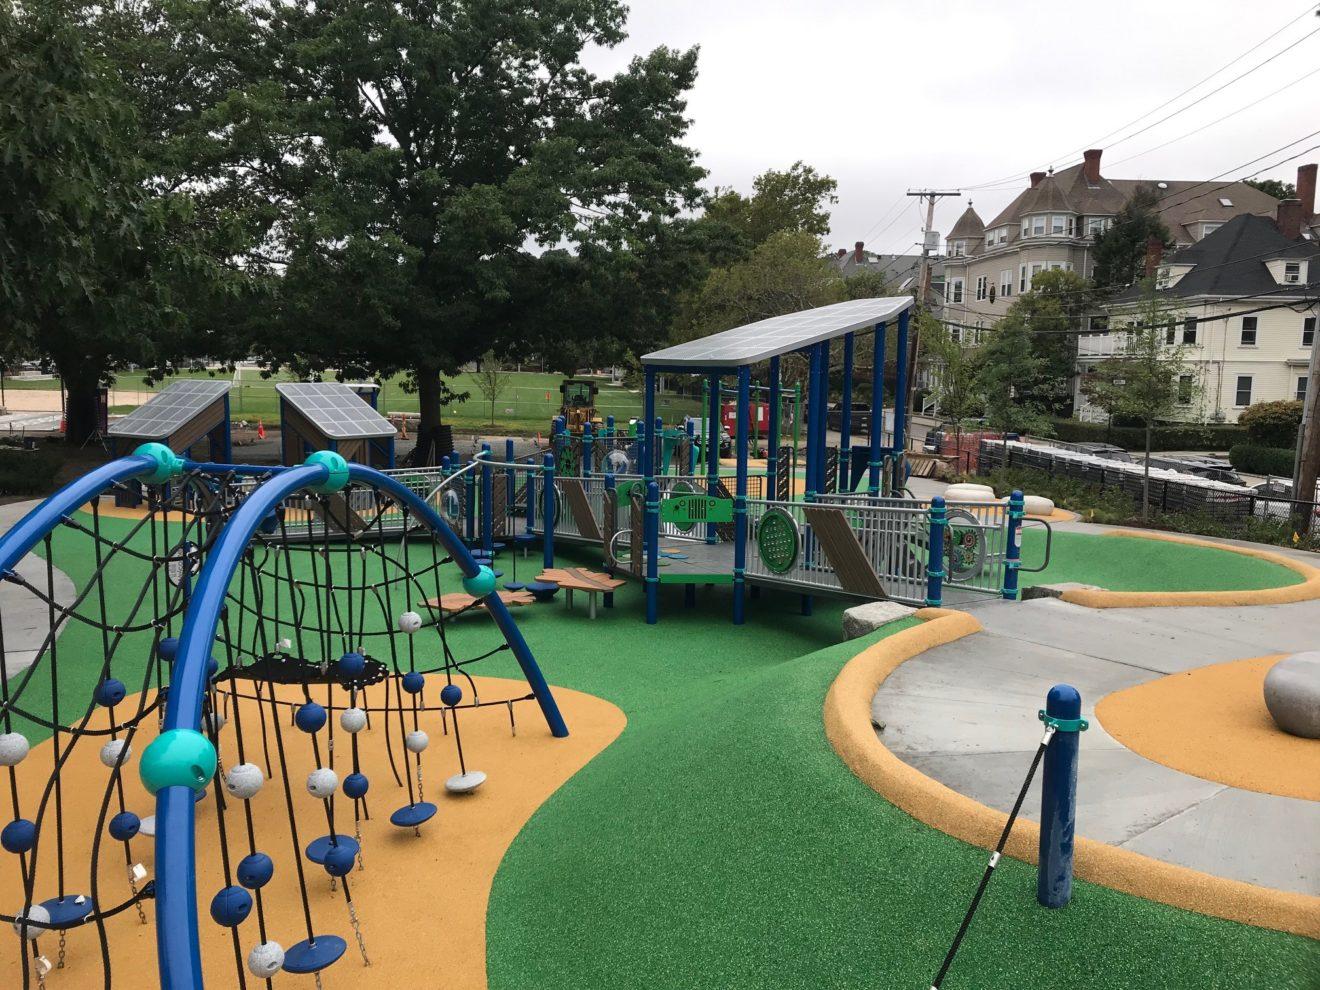 Newly remodeled Cypress Playground, with green and yellow surface and new play equipment.